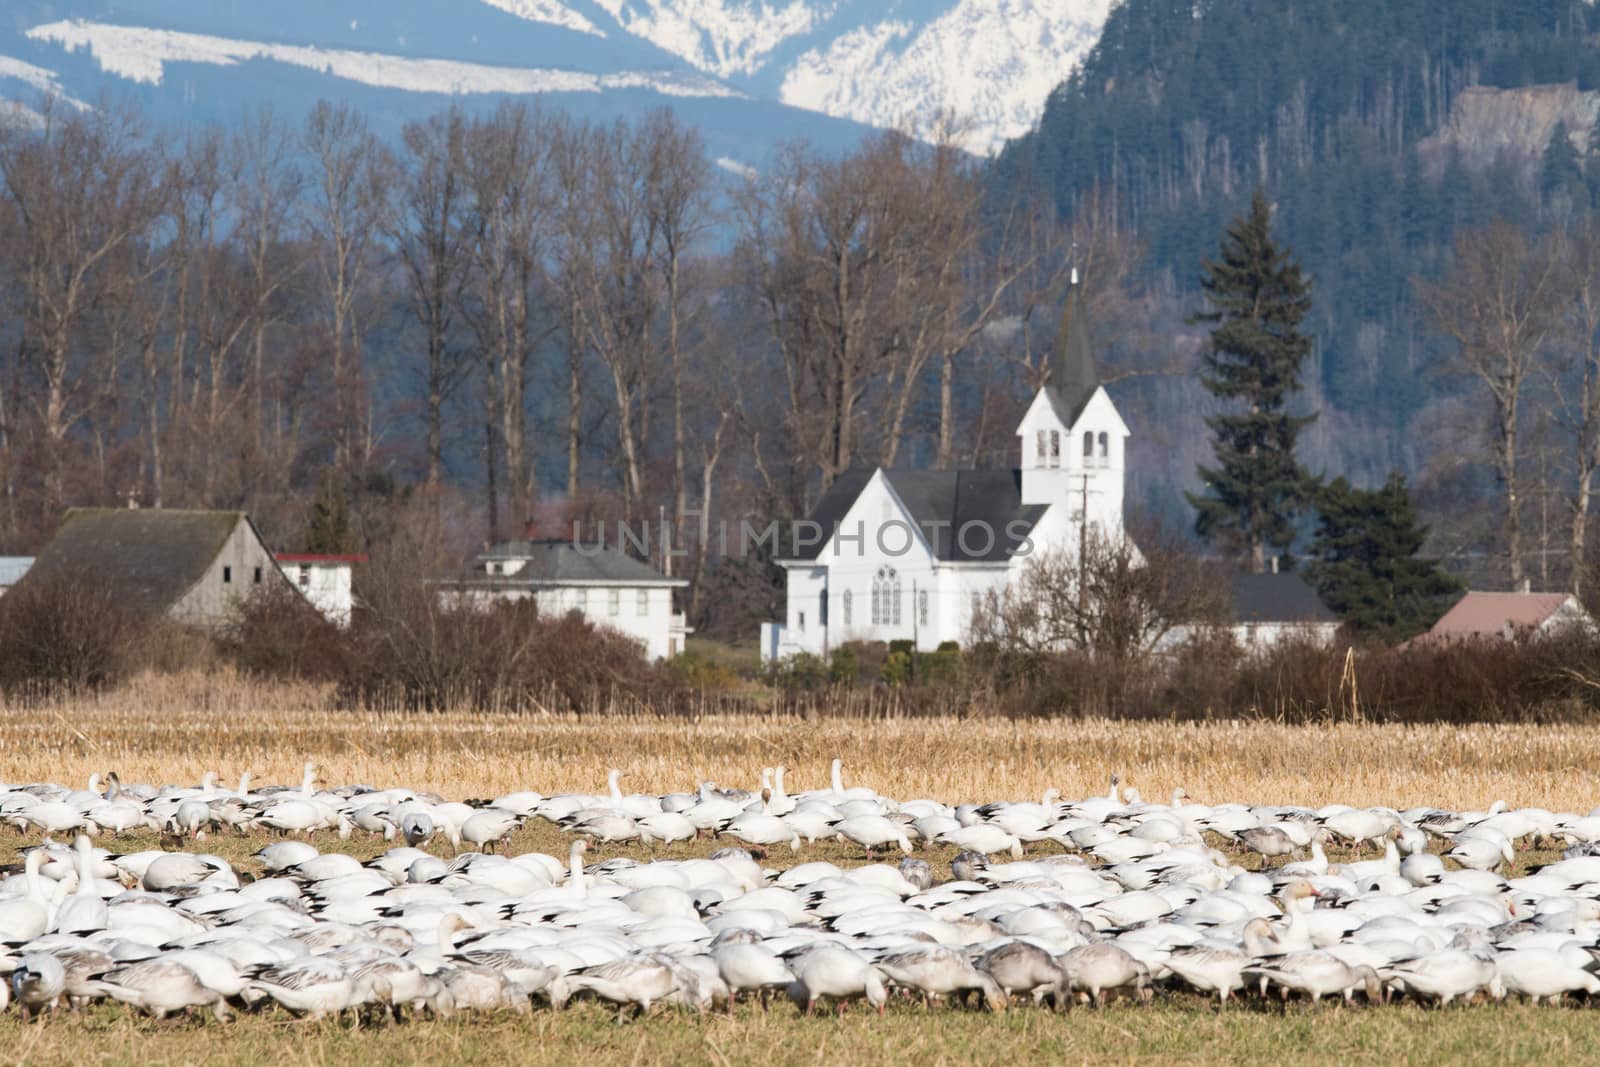 Snow Geese feeding in Skagit Valley, WA with church in the background